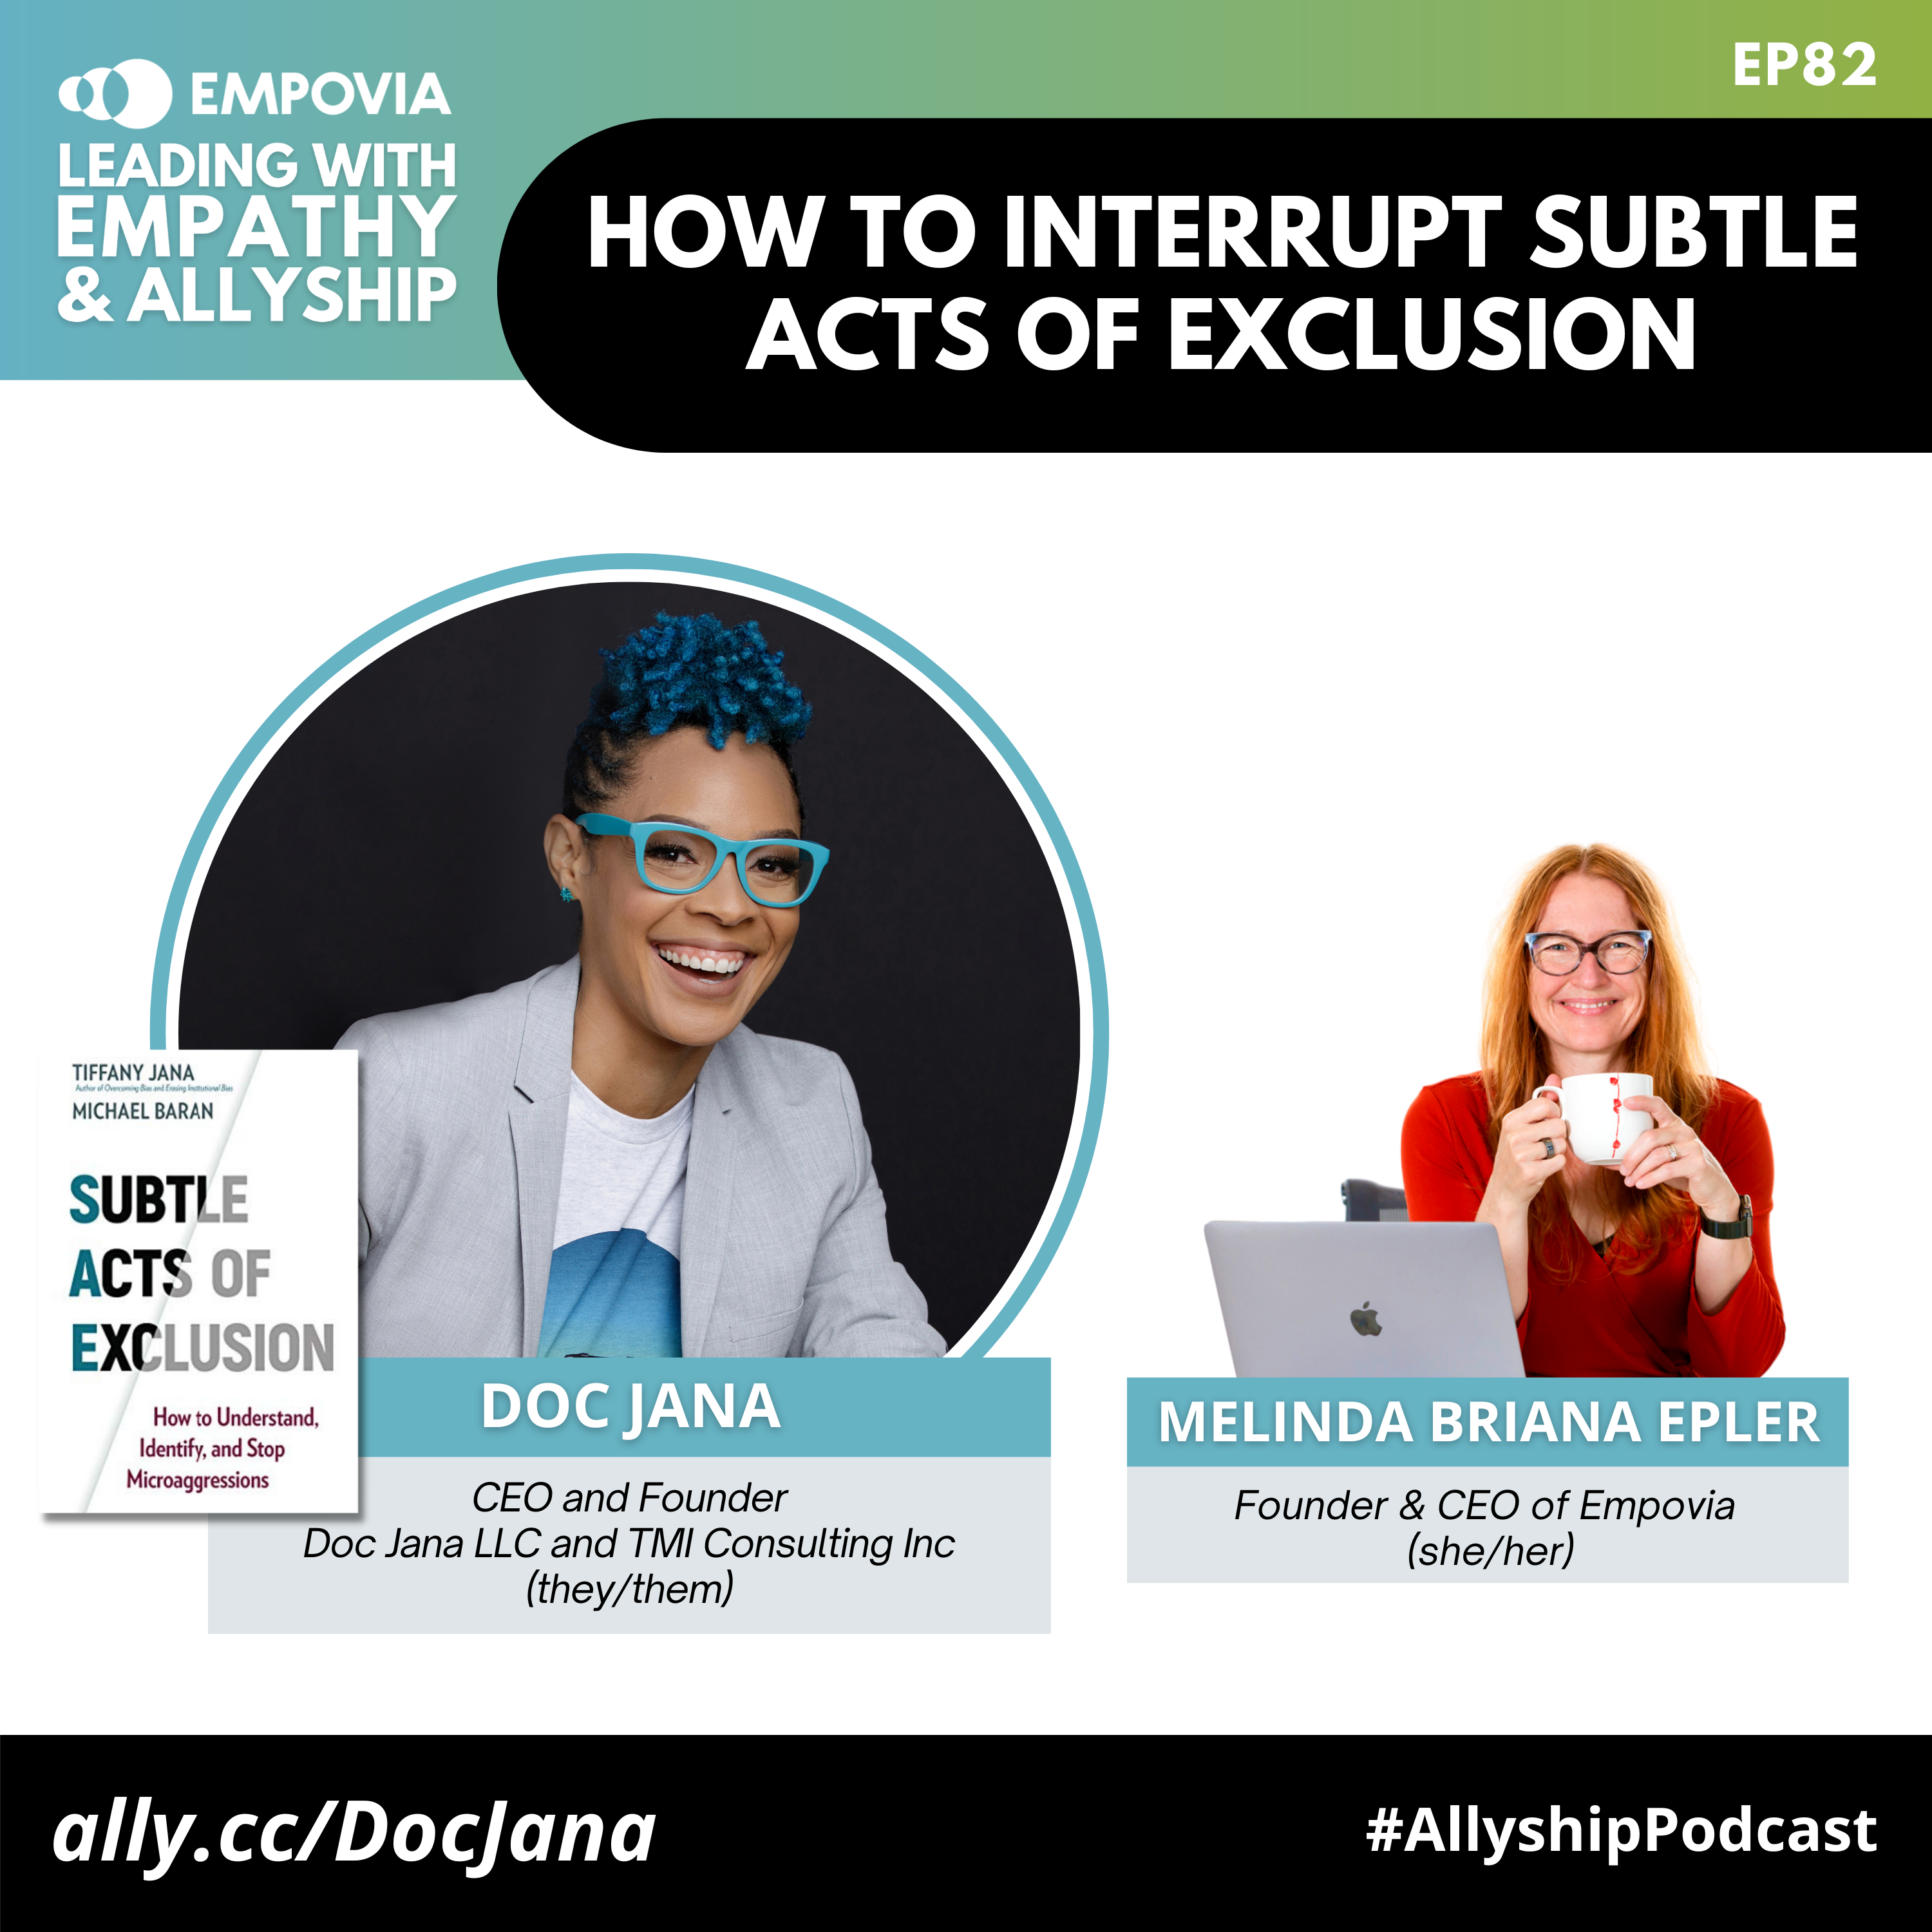 Leading With Empathy & Allyship promo with photos of Doc Jana, an African-American nonbinary person with short curly blue hair, matching blue glasses, gray suit on top of blue and white t-shirt, and an electric smile; beside them is the white book cover of SUBTLE ACTS OF EXCLUSION: How to Understand, Identify, and Stop Microaggressions; and host Melinda Briana Epler, a White woman with red hair, glasses, and orange shirt holding a white mug behind a laptop.